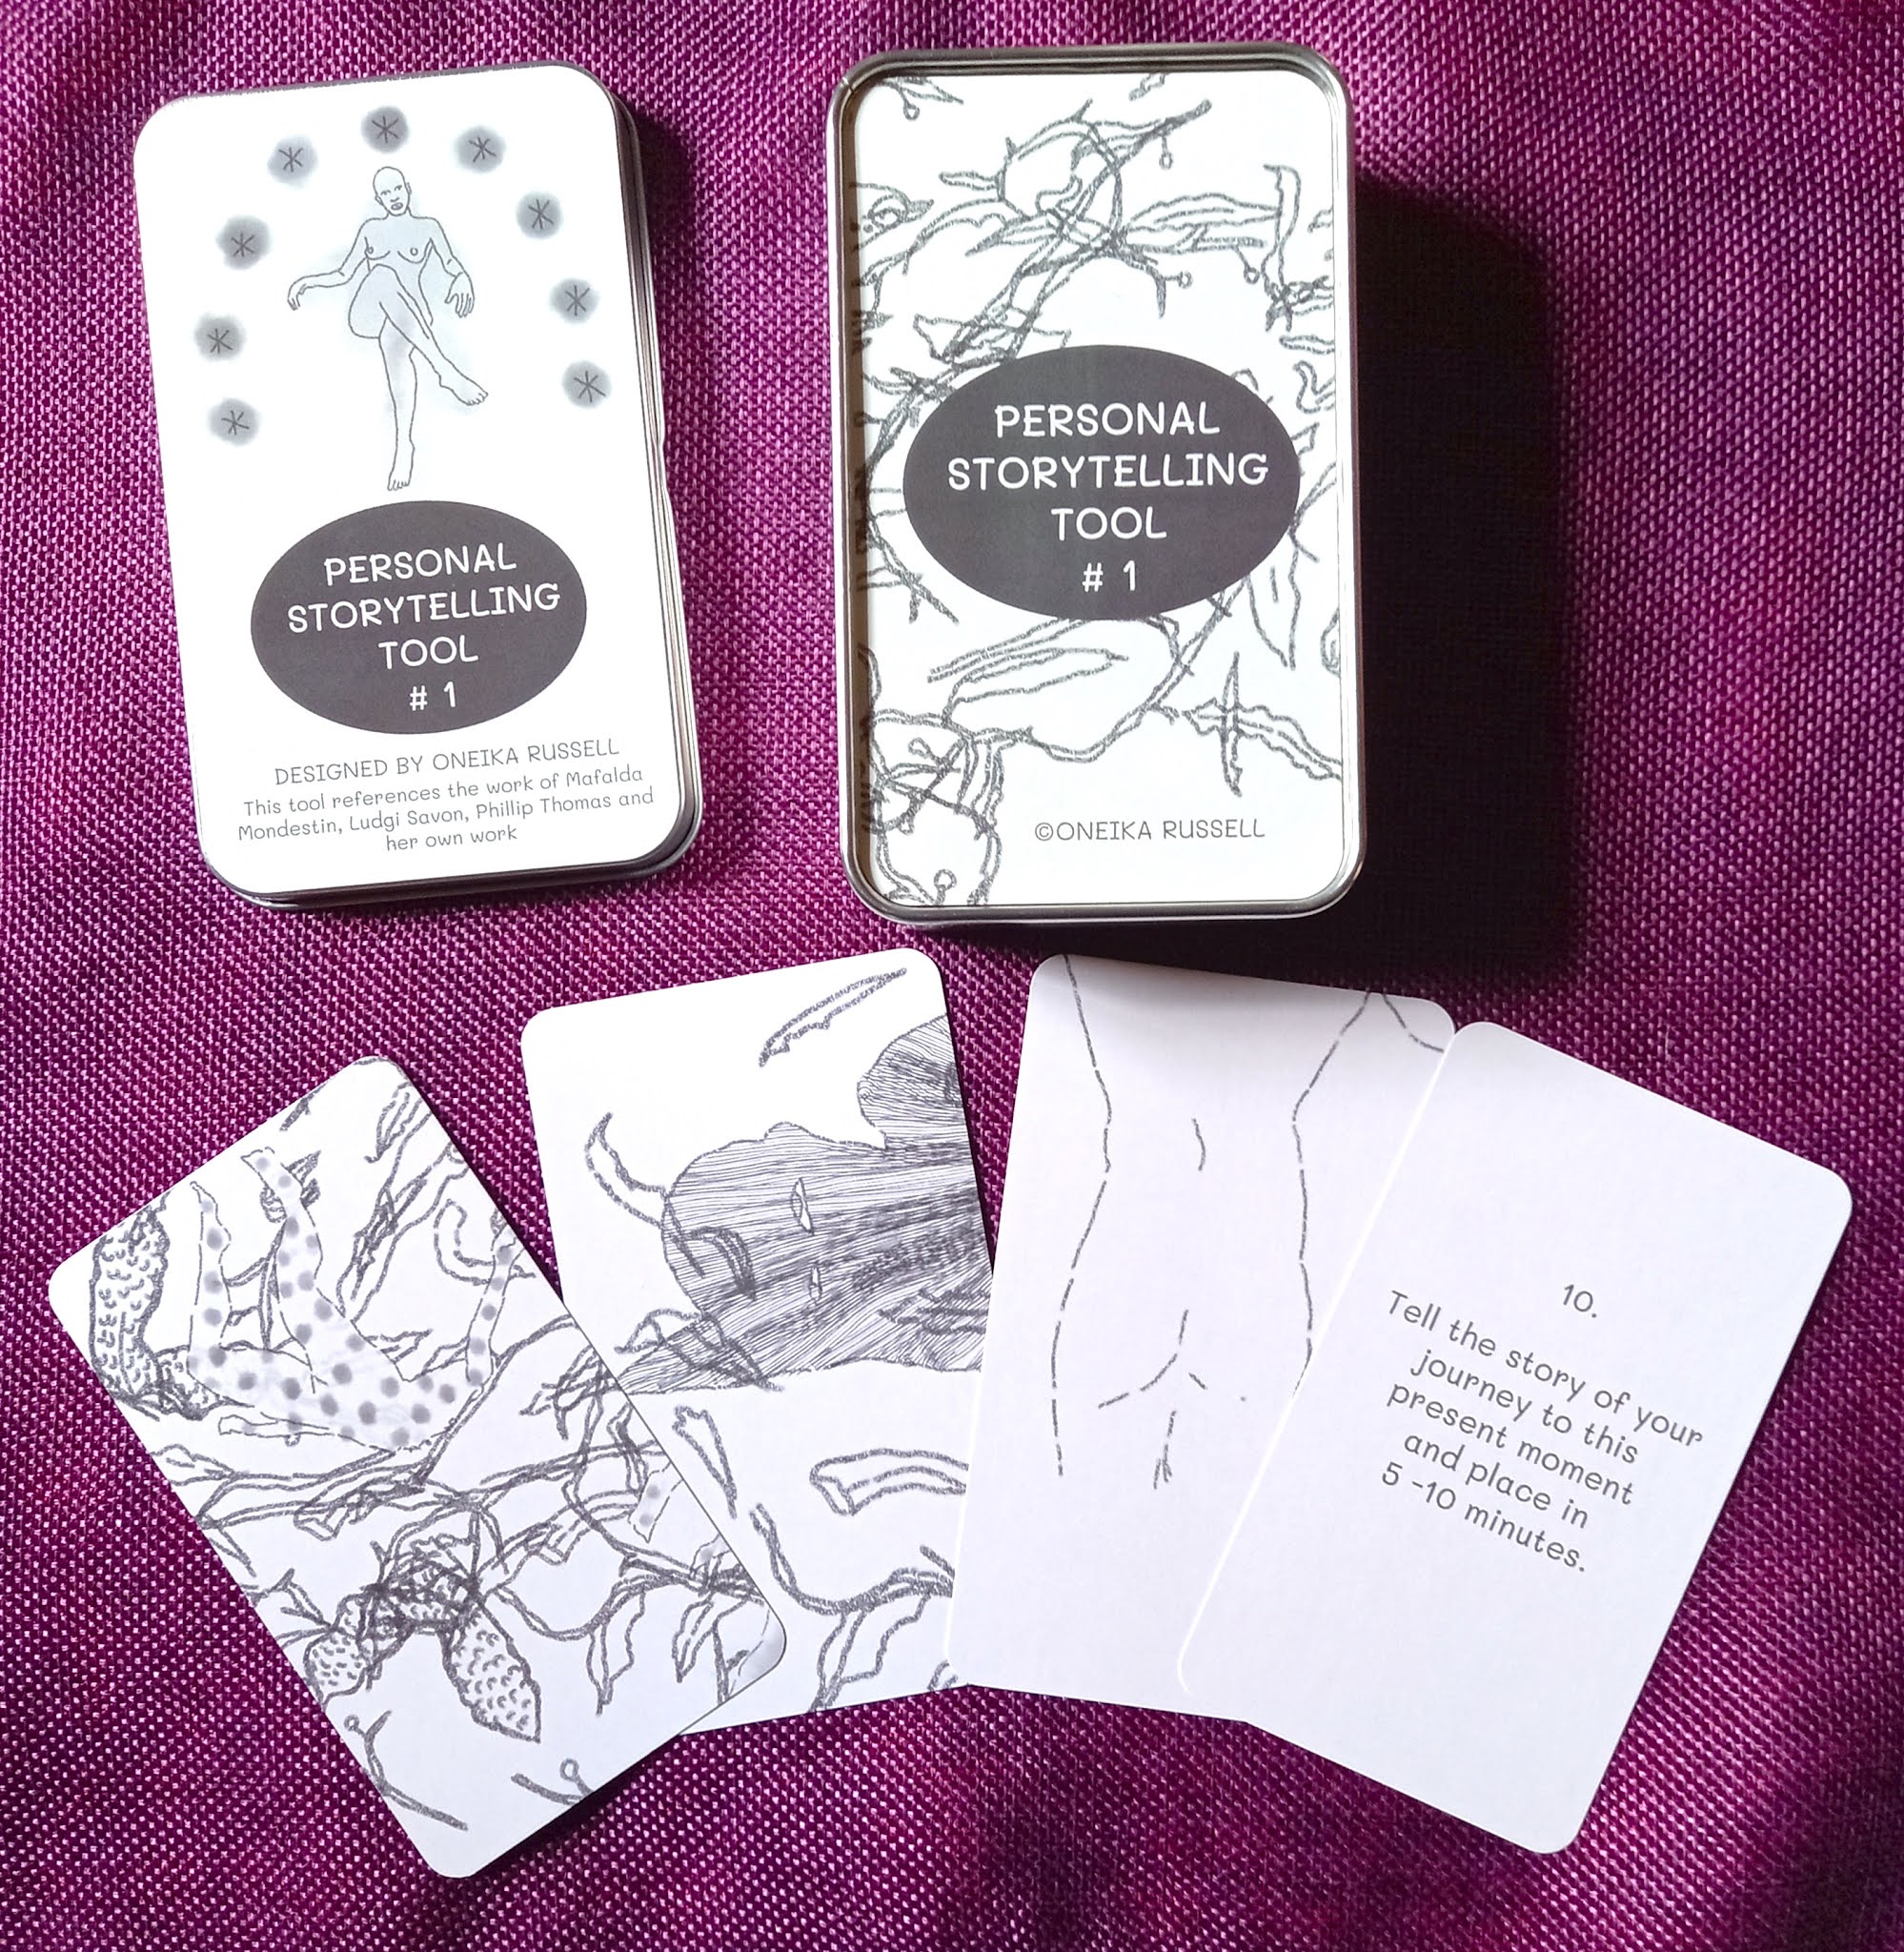 Personal Storytelling Tool #1  card deck spread out